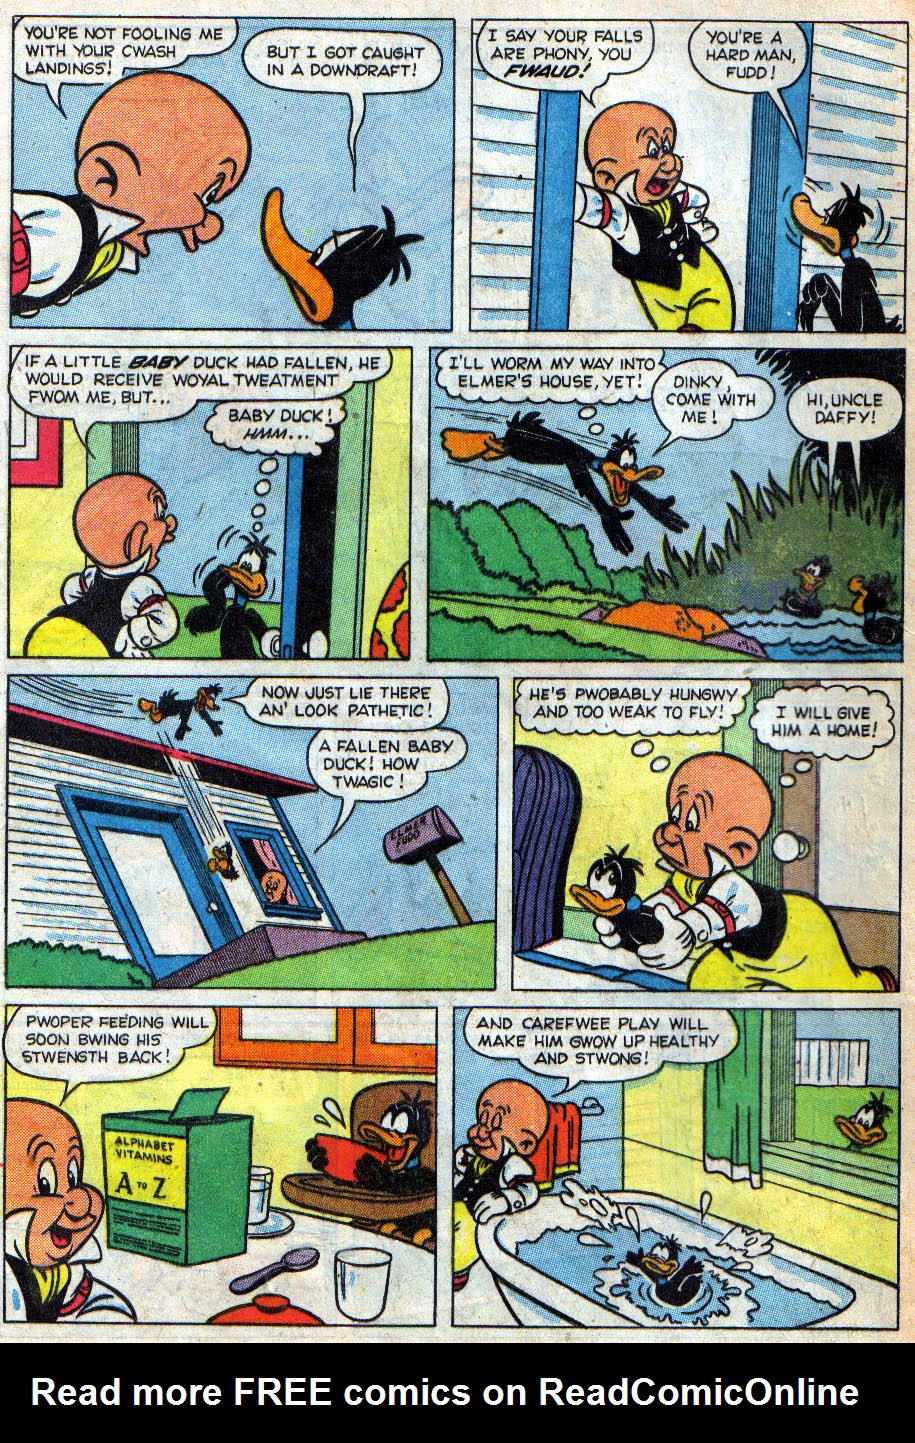 Read online Daffy comic -  Issue #5 - 4